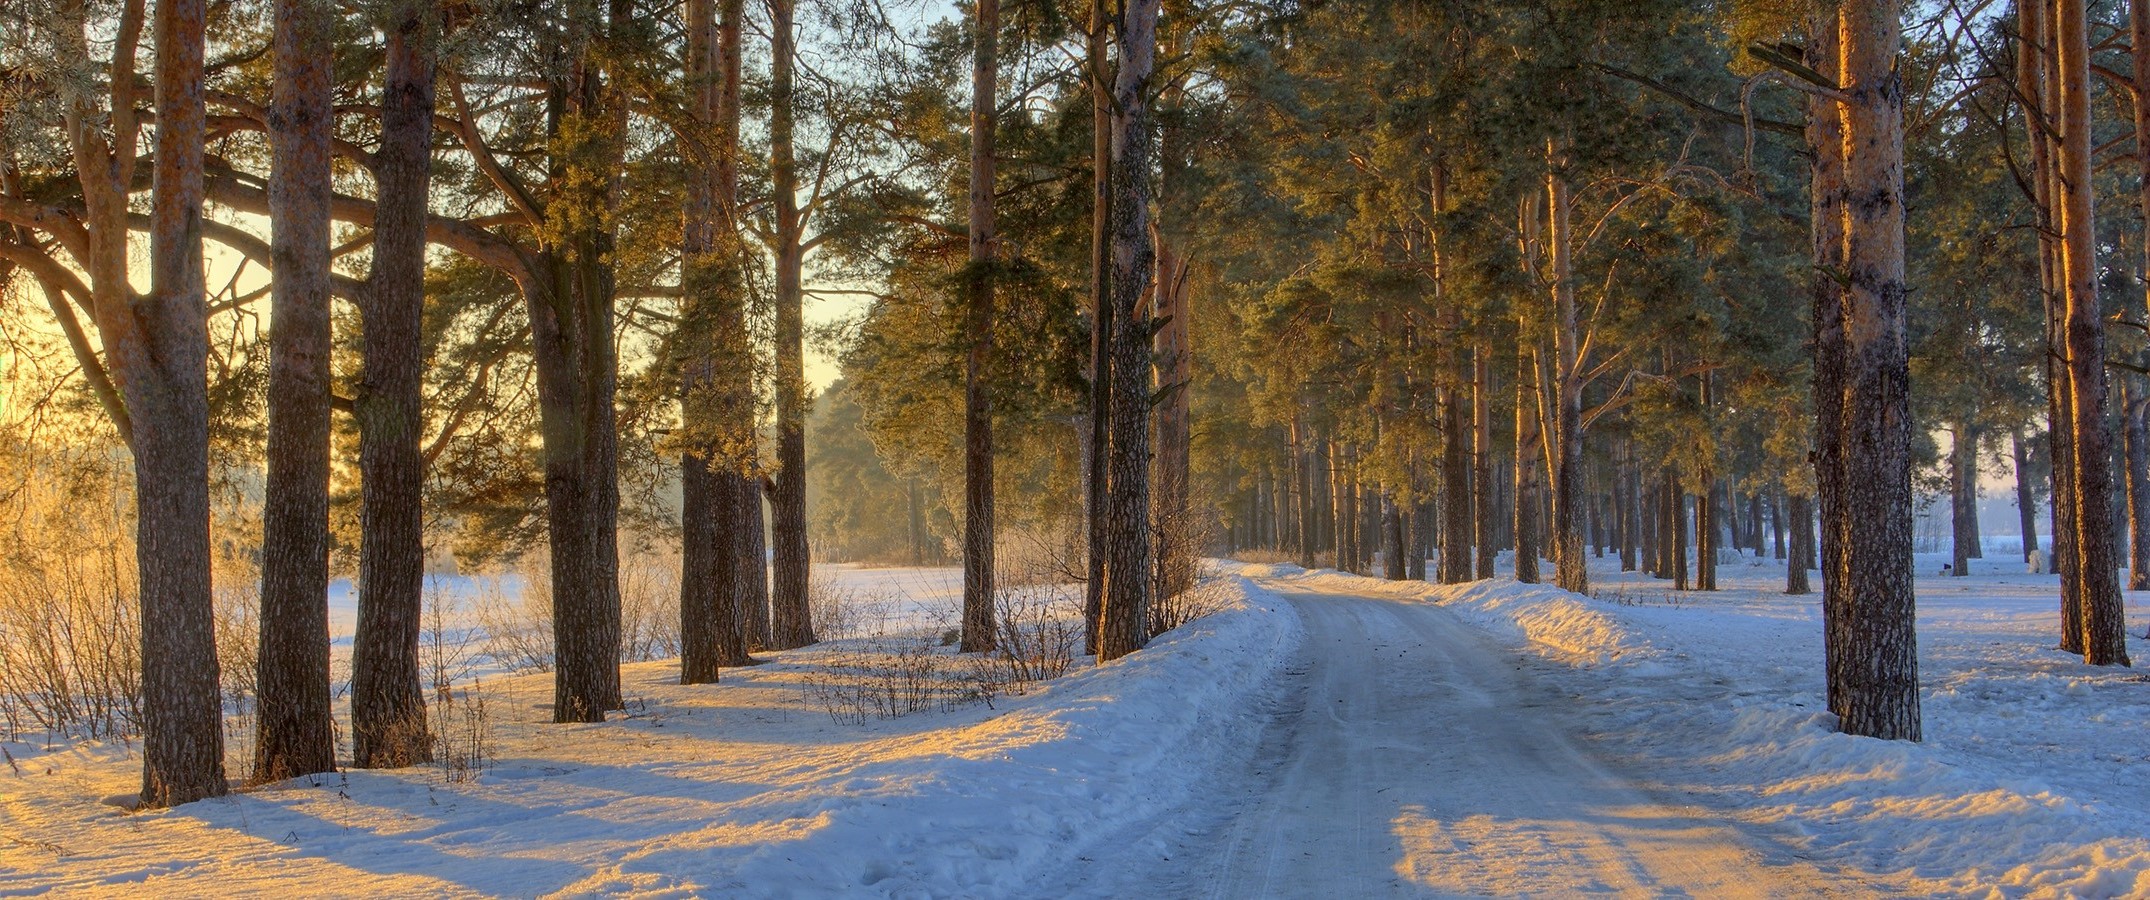 nature, Landscape, Morning, Sunlight, Forest, Road, Winter, Snow, Panoramas, Cold, Trees, Russia Wallpaper